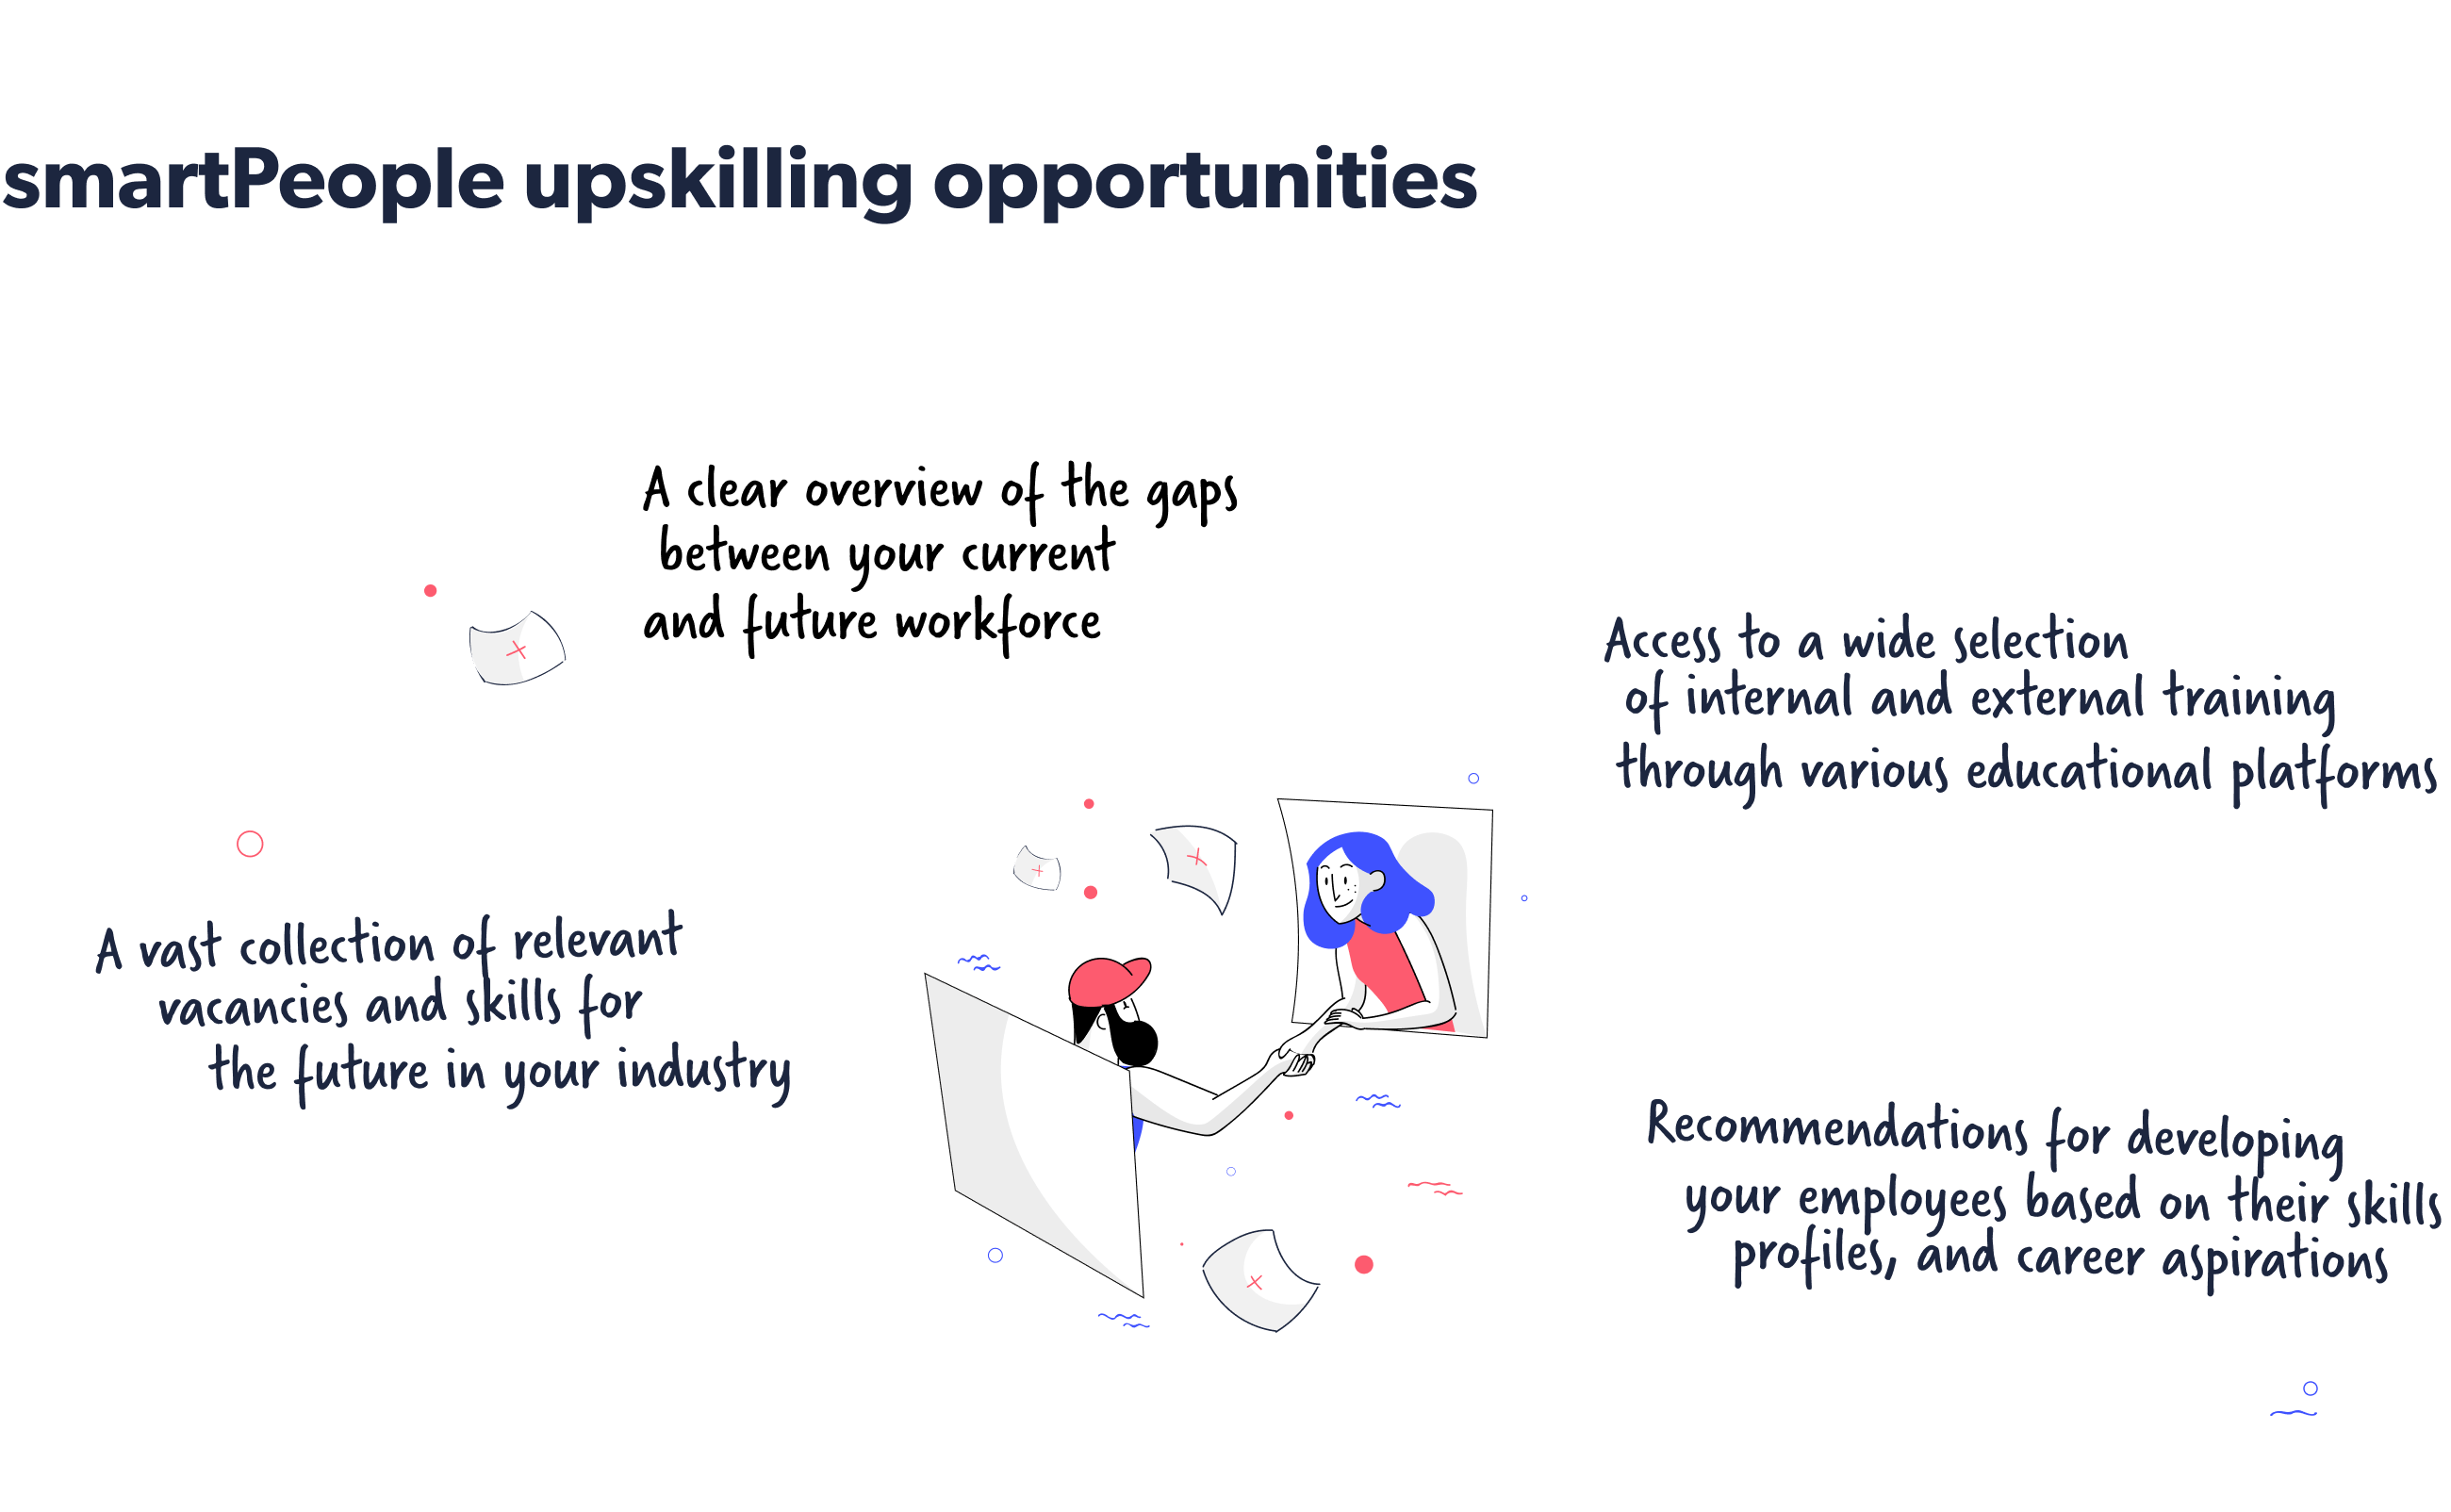 smartPeople upskilling opportunities